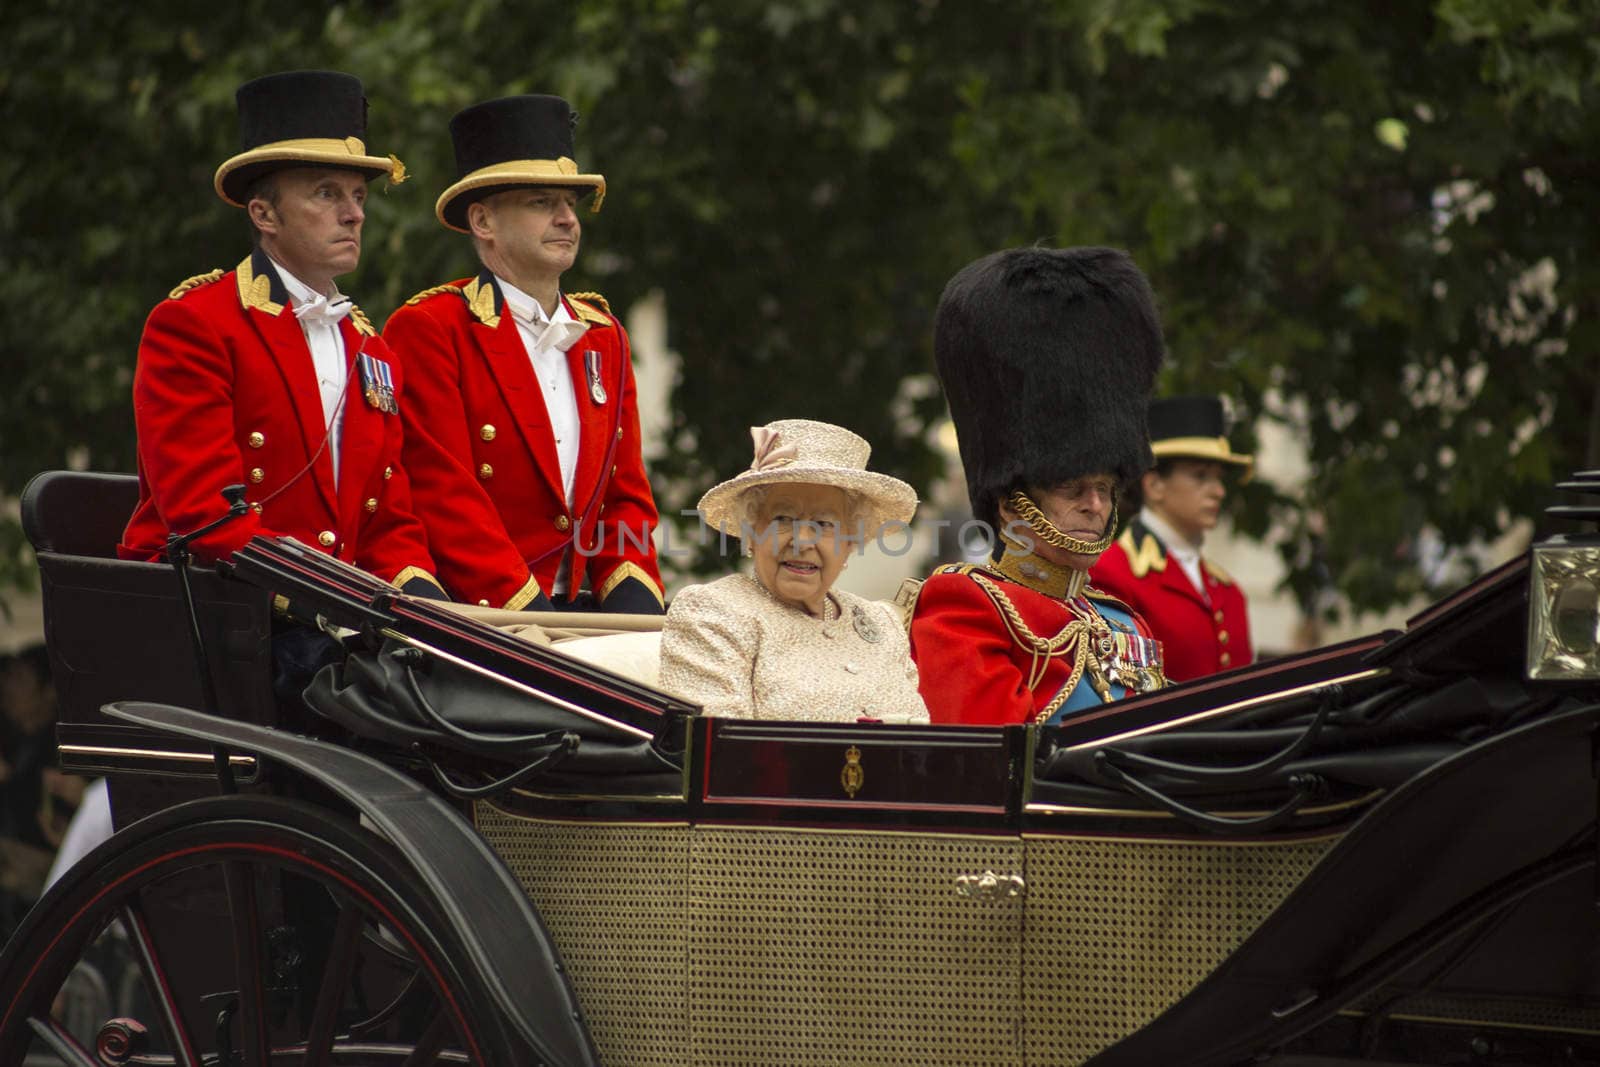 Queen Elizabeth II in an open carriage with Prince Philip. Trooping the colour 2015 marking the Queens official birthday, London, UK